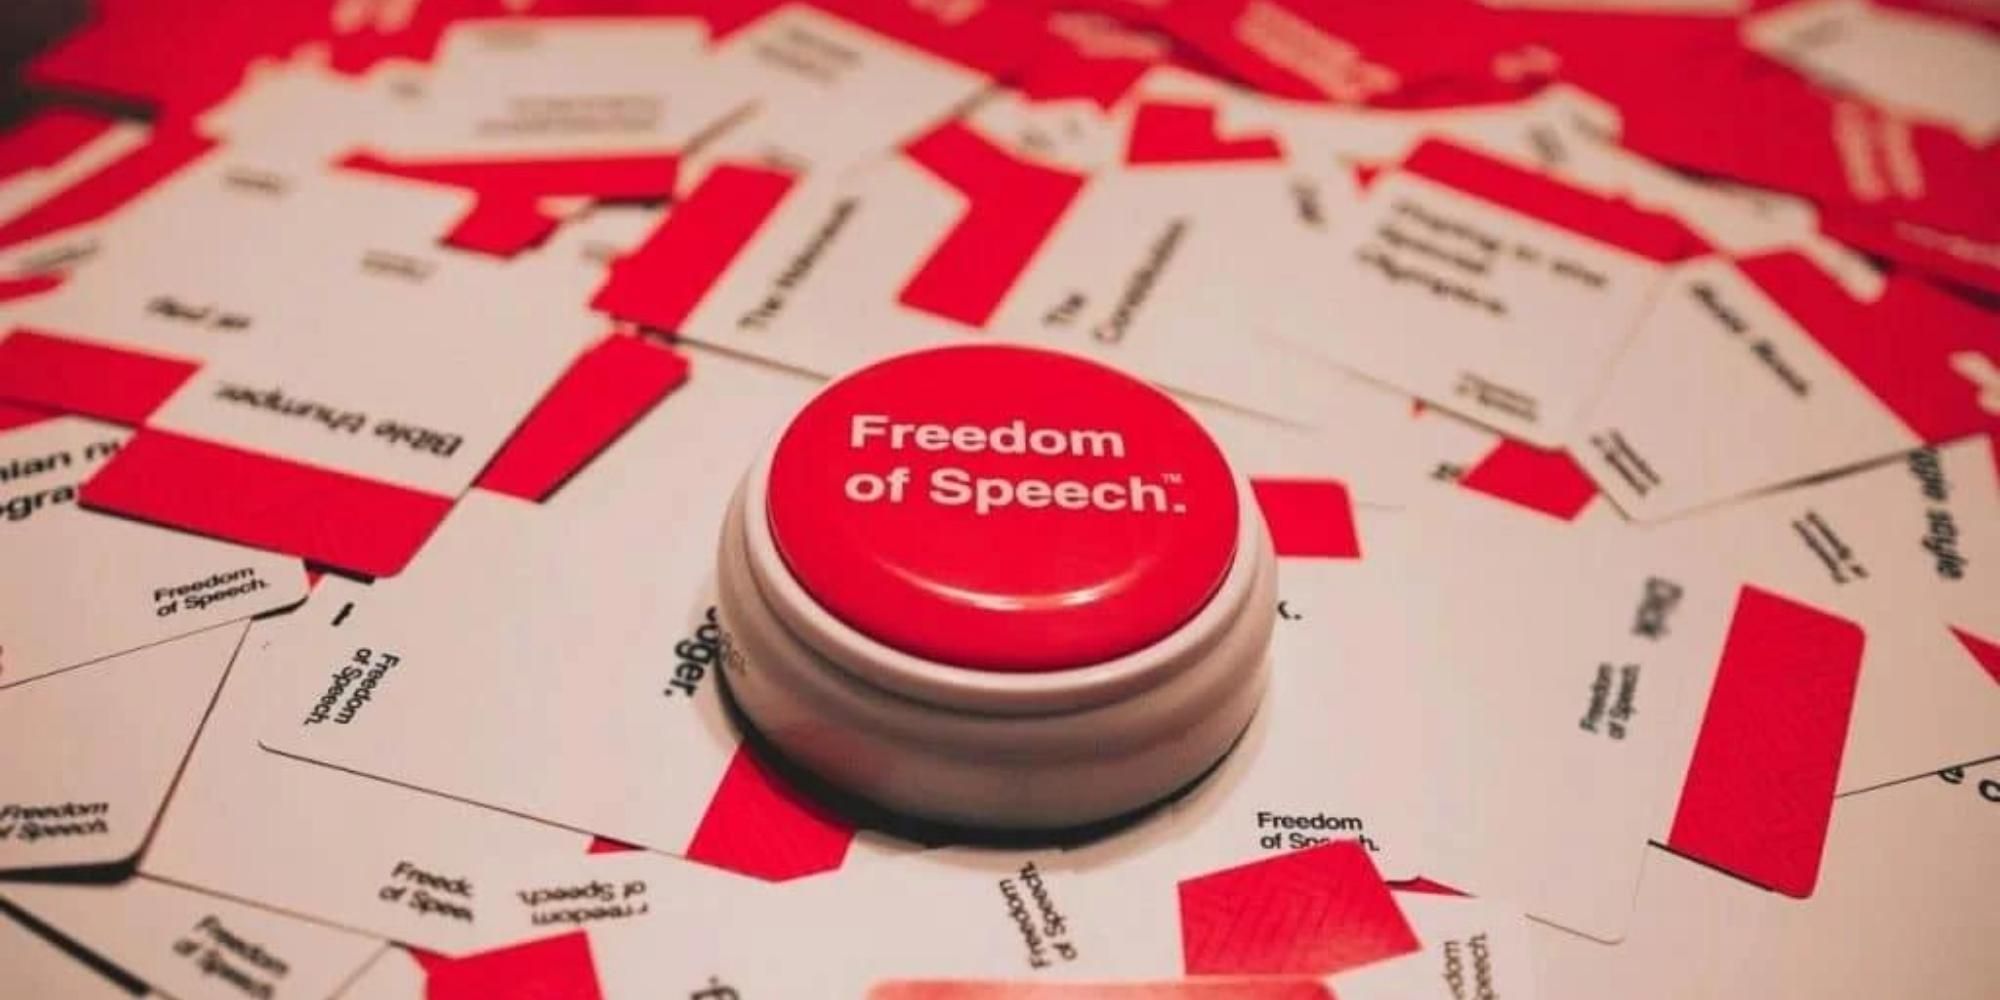 components of Freedom of Speech